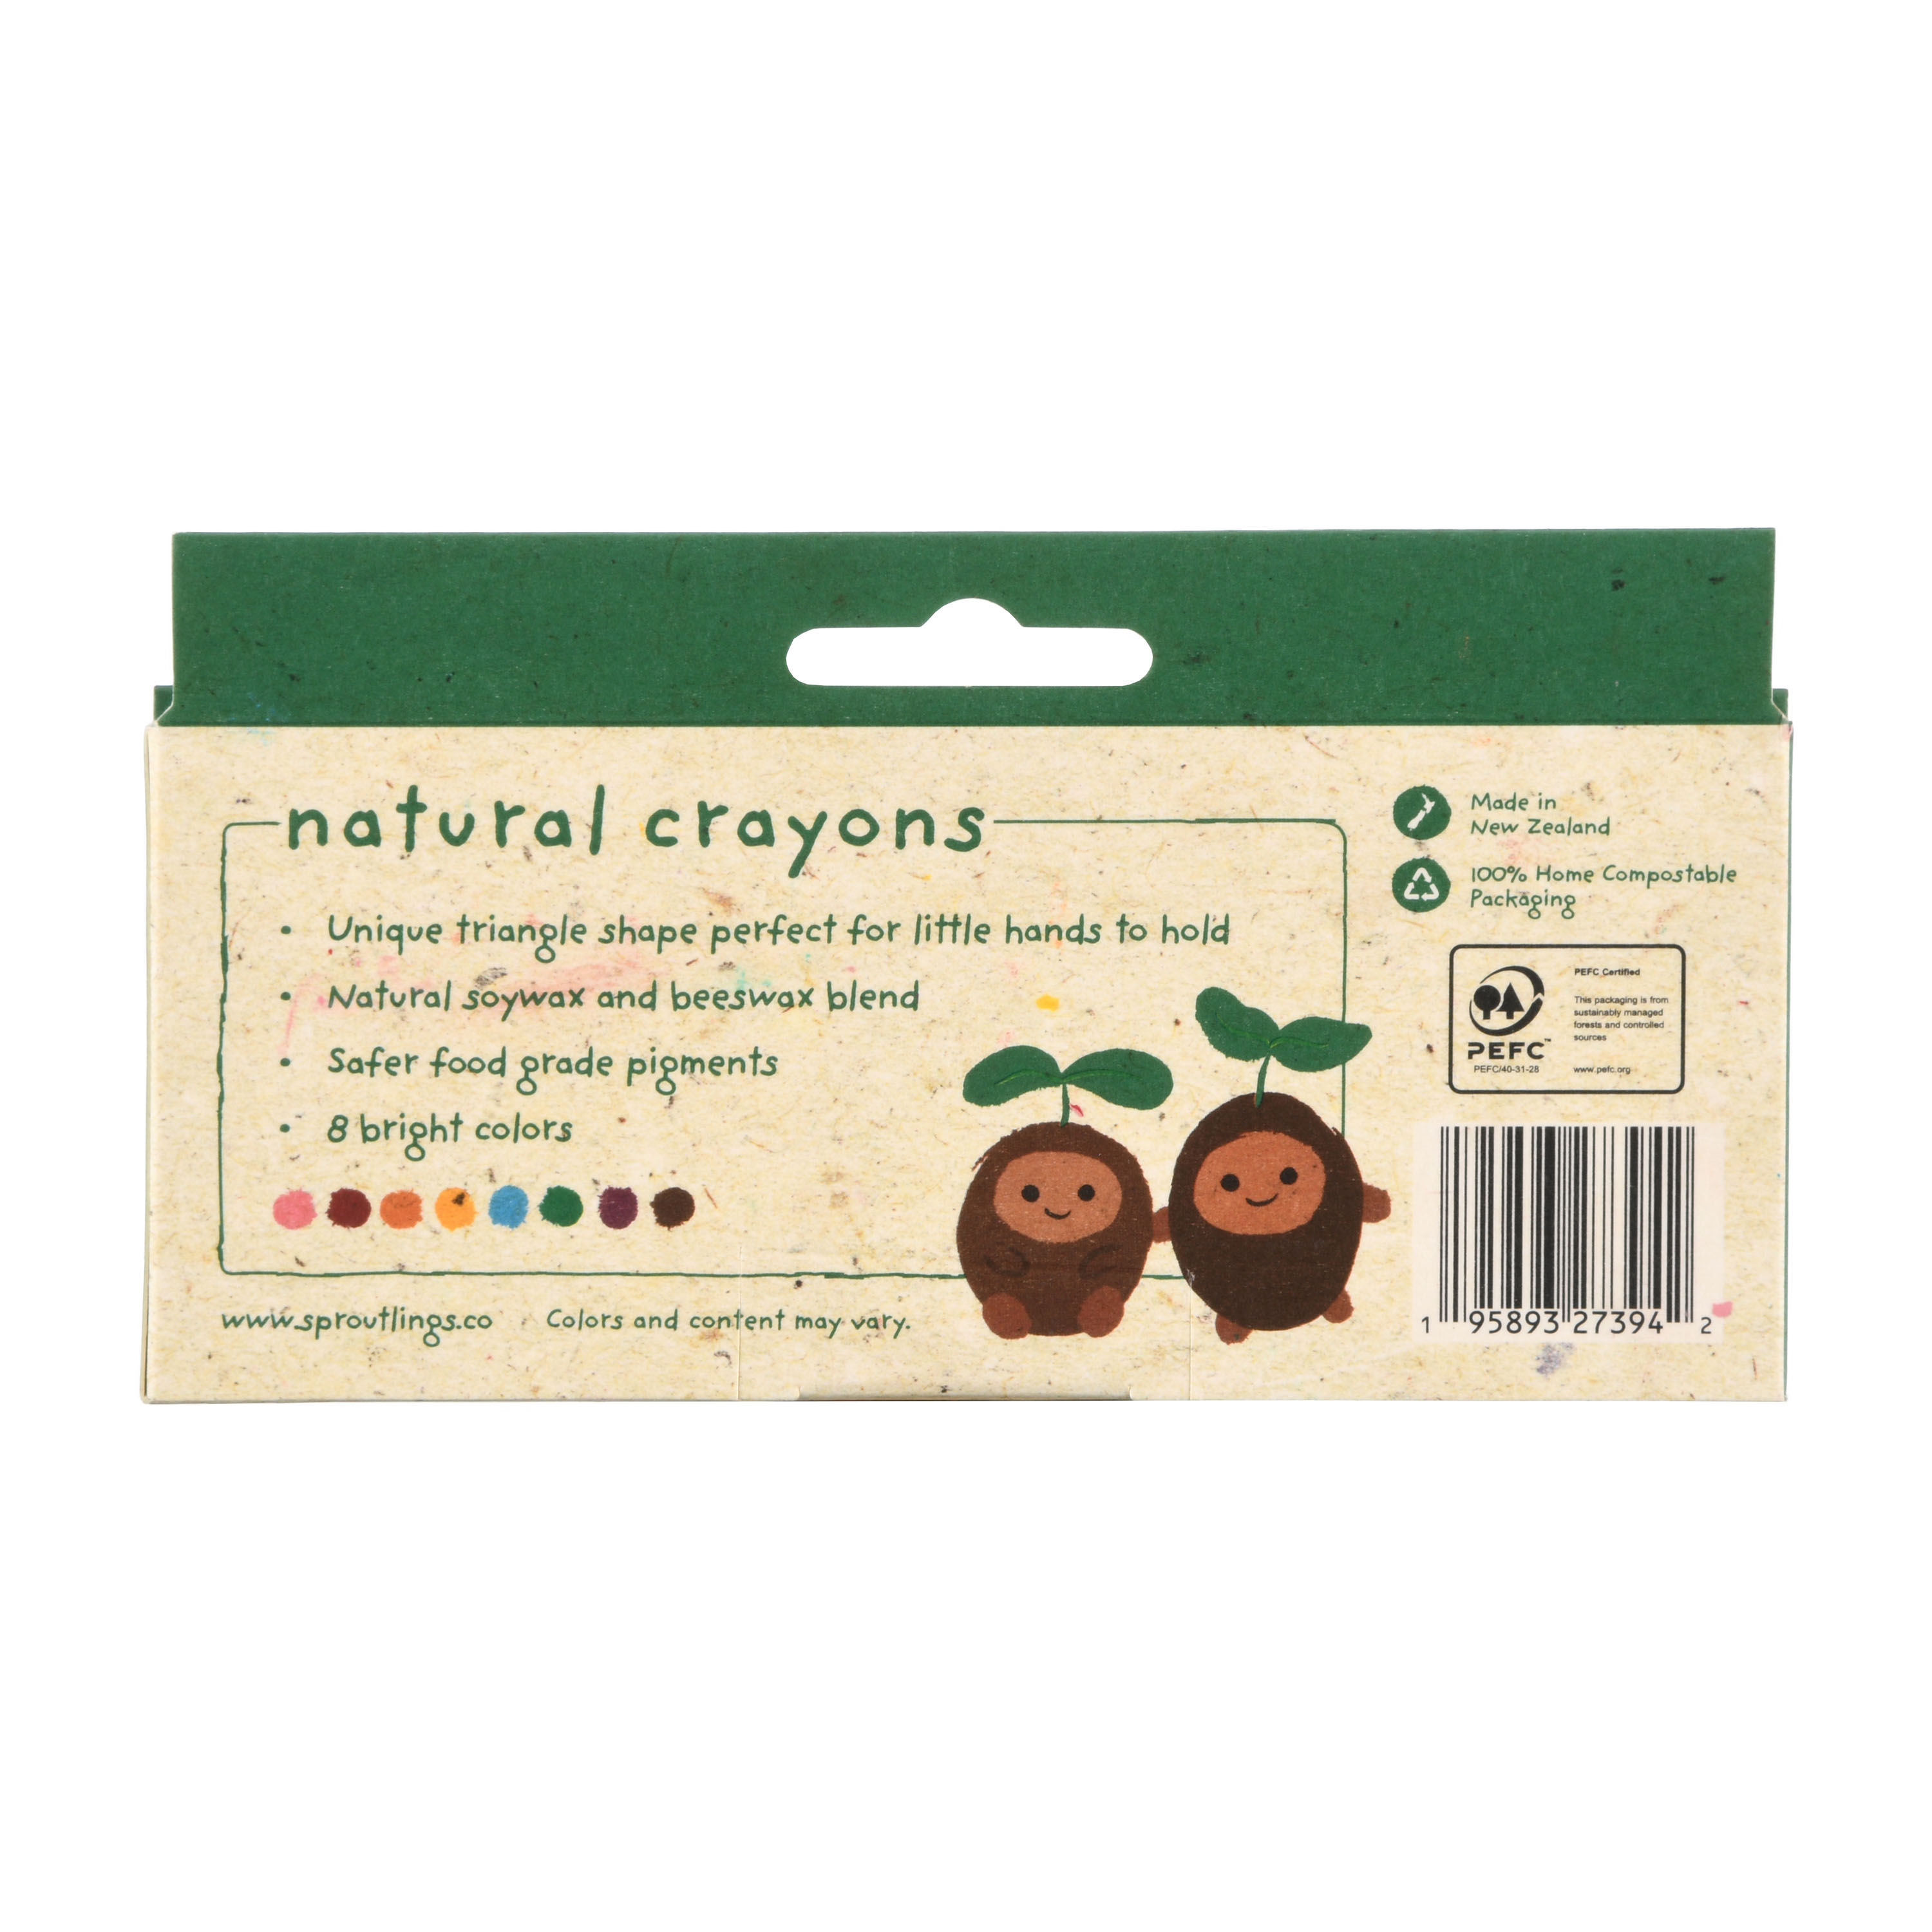 Sproutlings First Grasp Natural Soy & Beeswax Crayons, 8 Piece Count - image 2 of 8